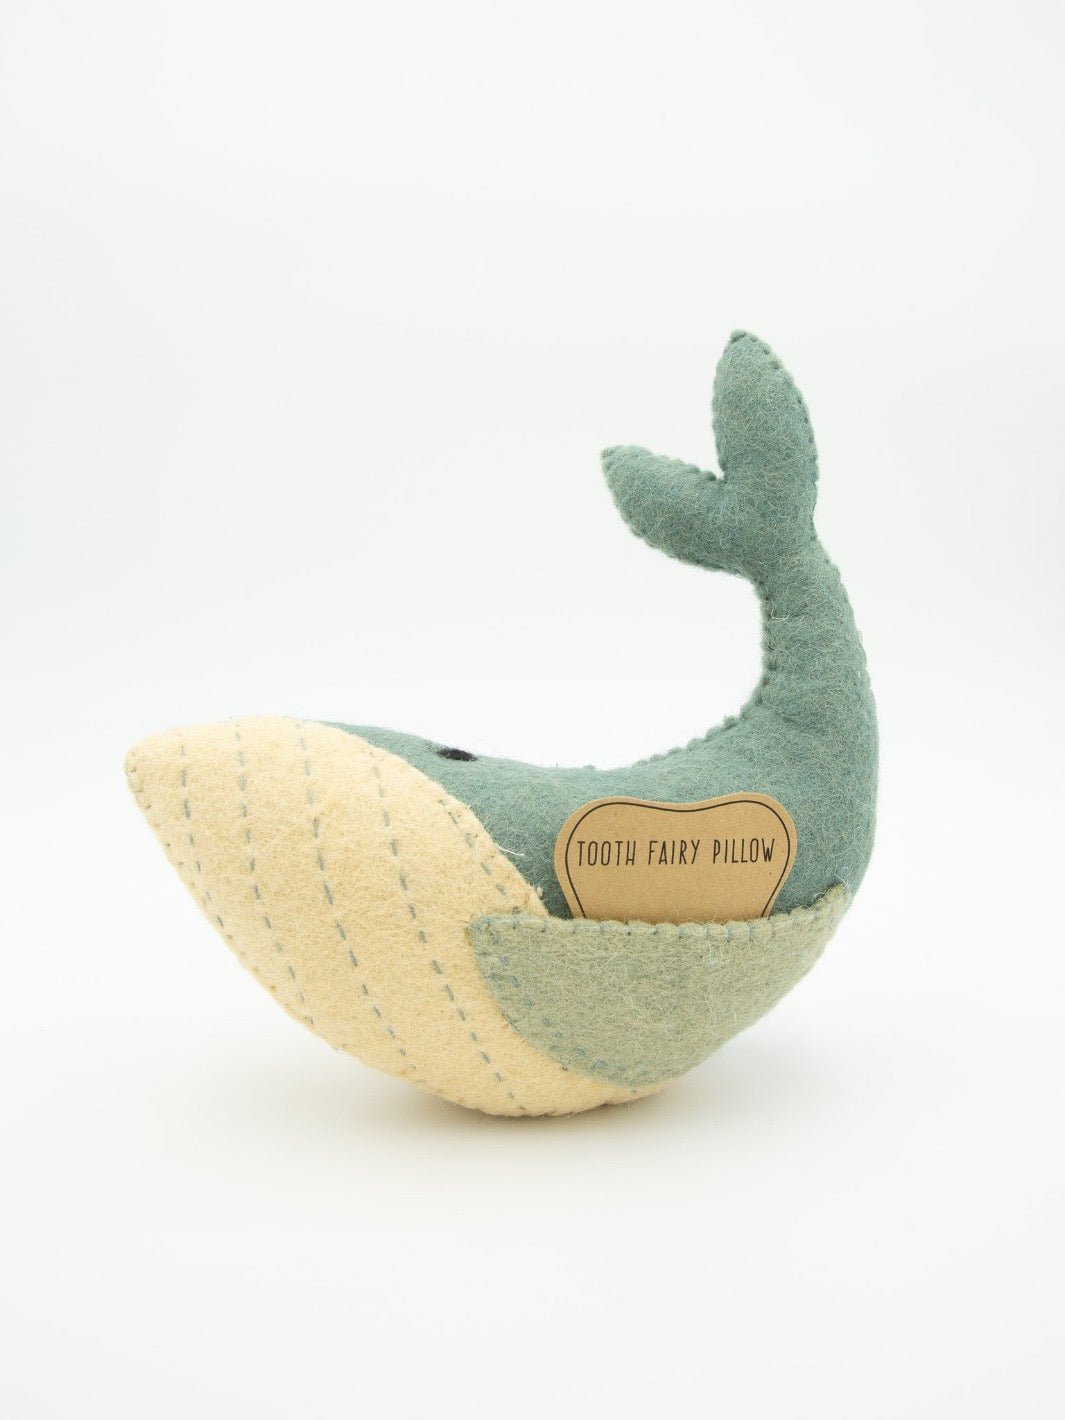 Whale Tooth Fairy Pillow - Heyday